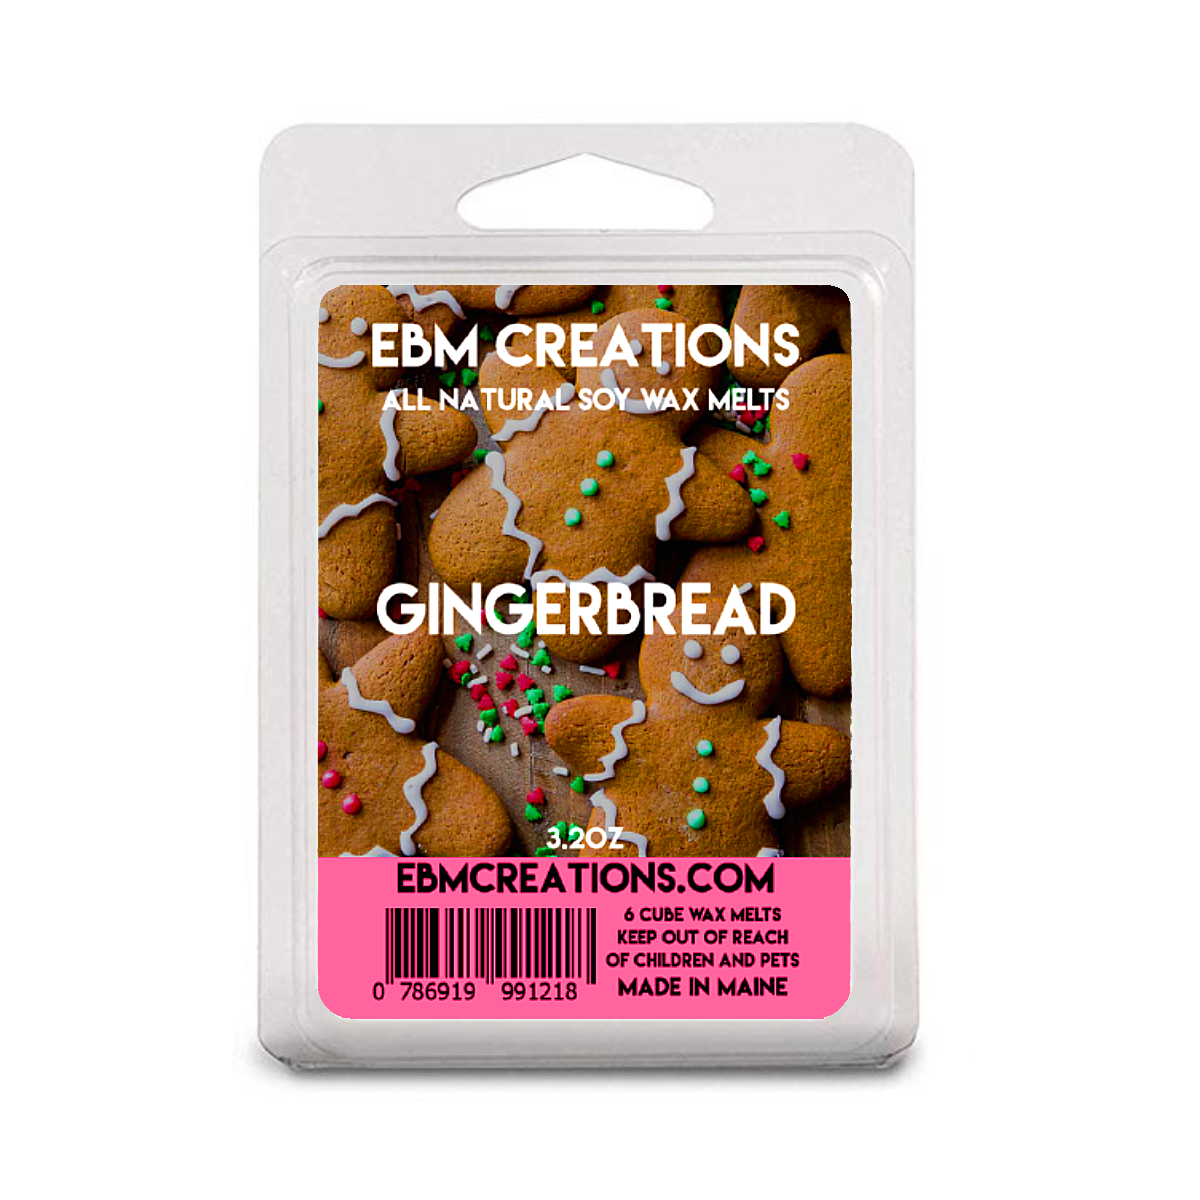 Gingerbread - 3.2 oz Clamshell